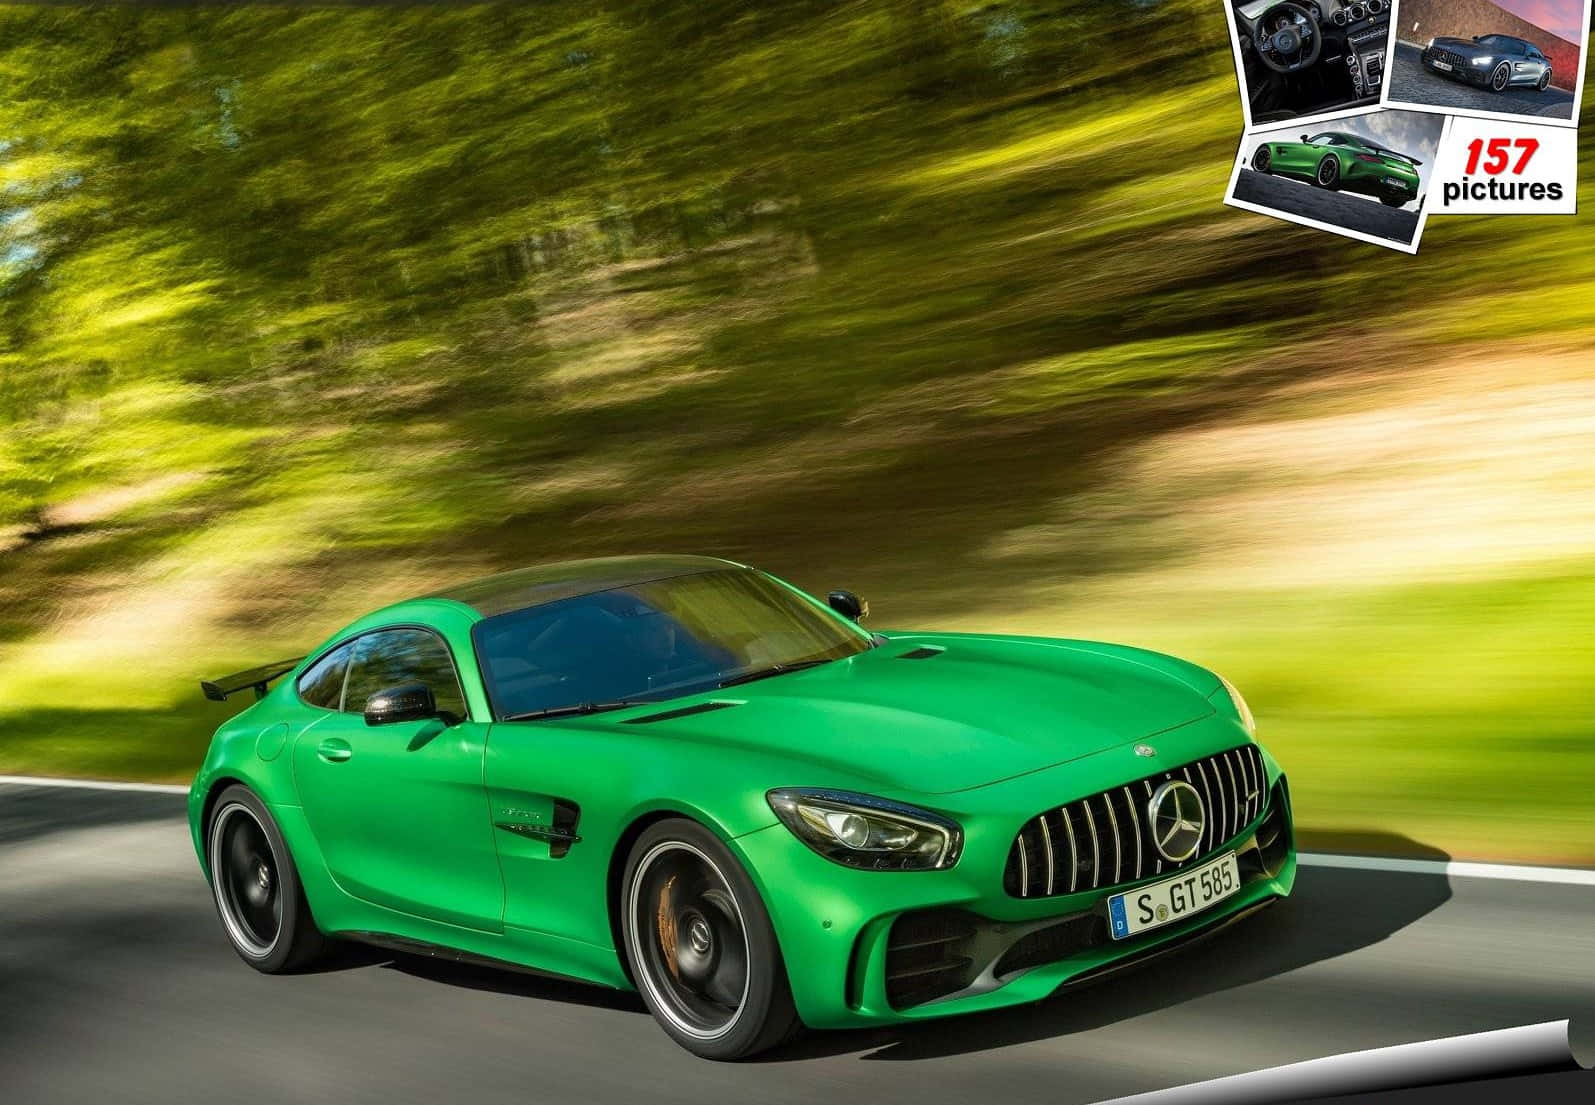 Get Ready to Experience a Thrill Ride with the Best AMG GT-R